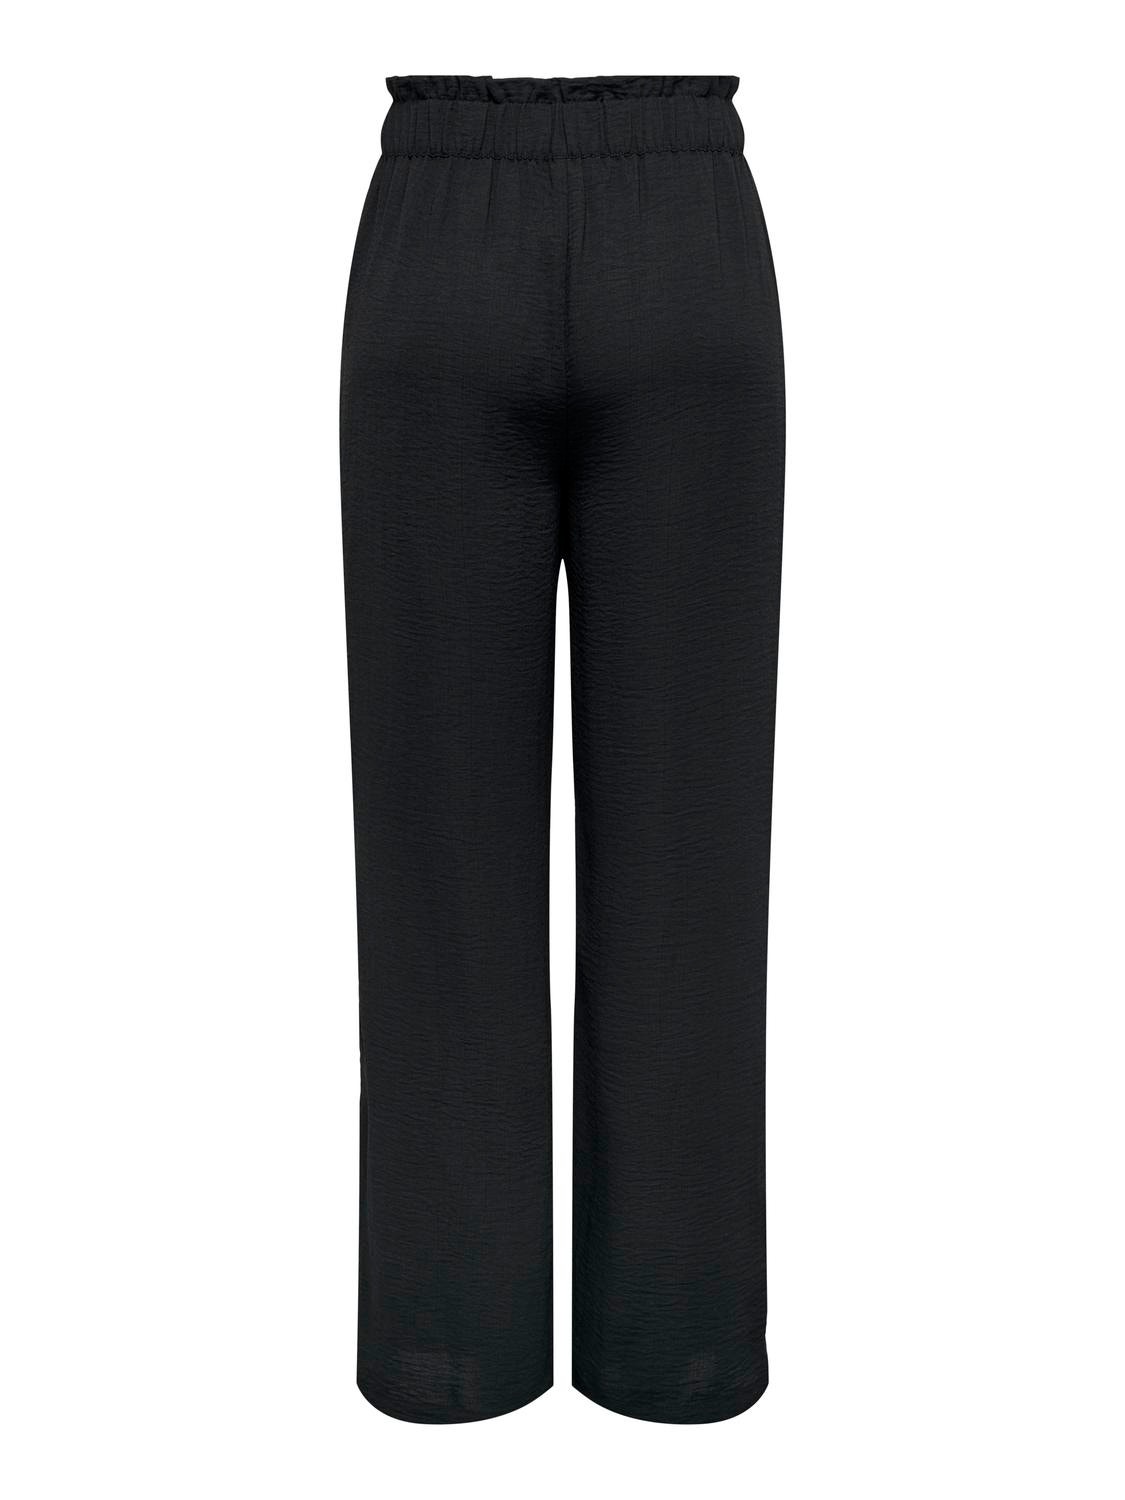 ONLY Highwaisted Wide Pants -Black - 15271184